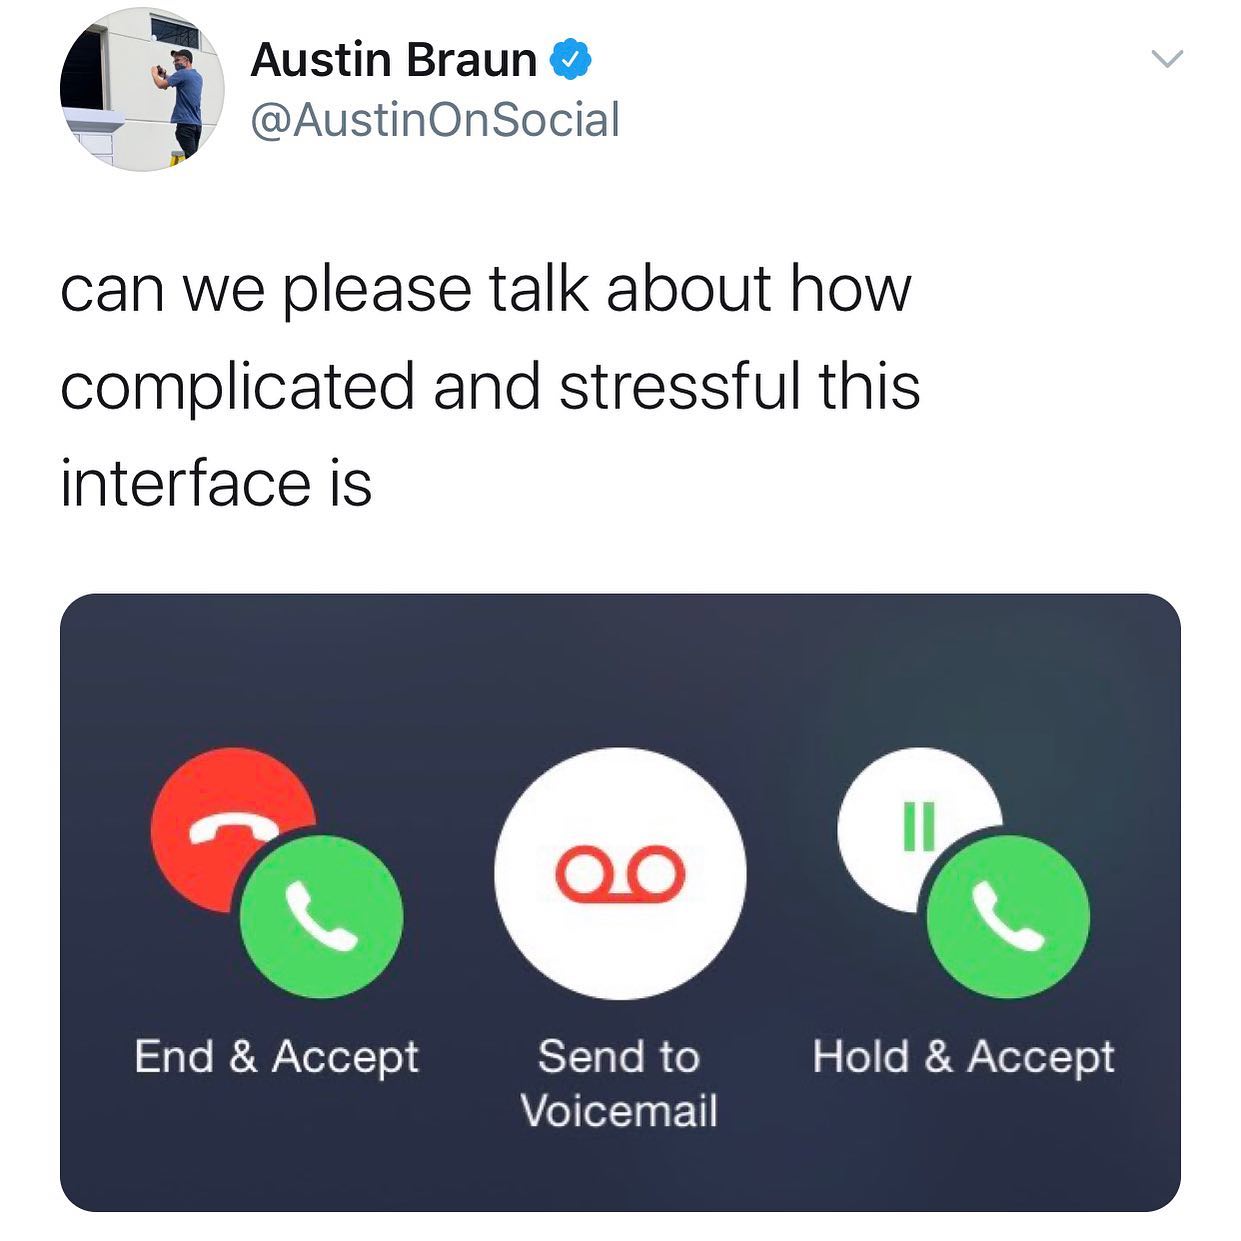 dank memes - twitter - call waiting - Austin Braun On Social can we please talk about how complicated and stressful this interface is End & Accept Hold & Accept Send to Voicemail